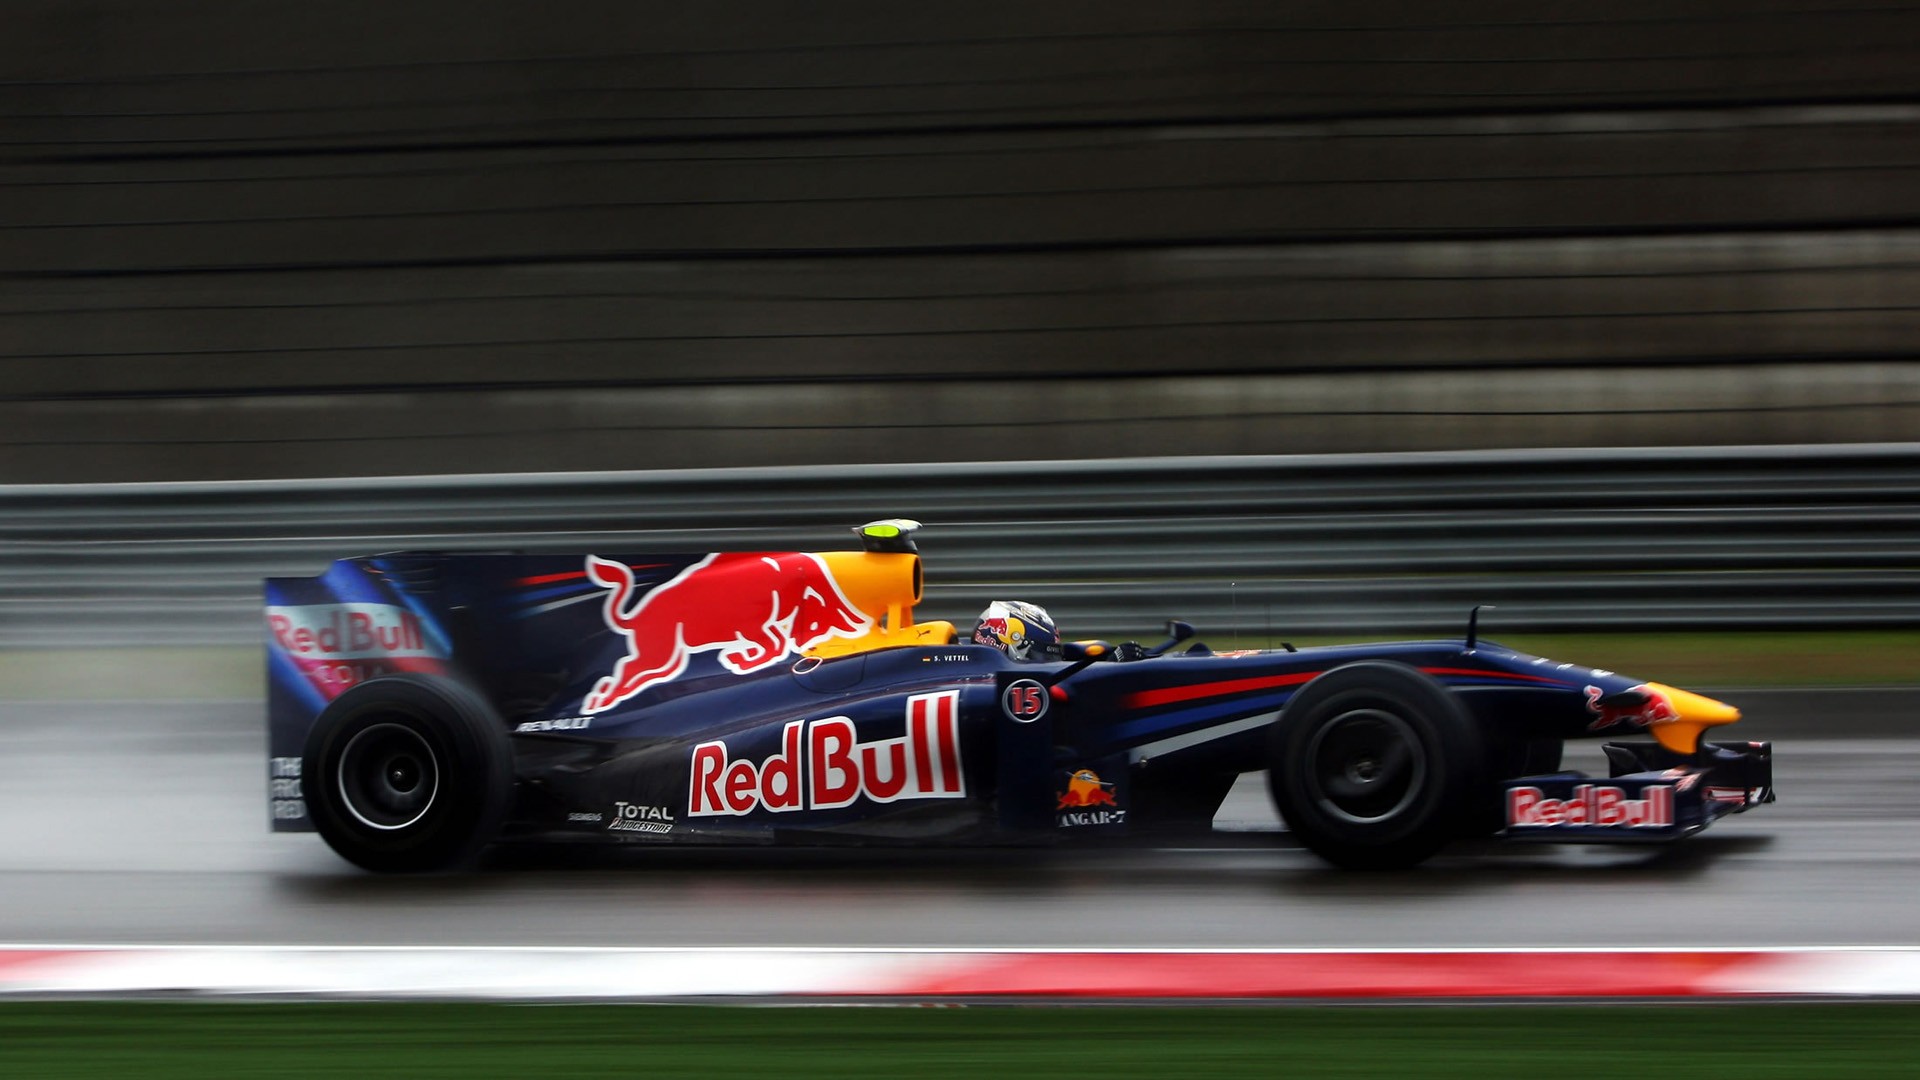 Formula 1, Red Bull Racing Wallpapers HD / Desktop and Mobile Backgrounds